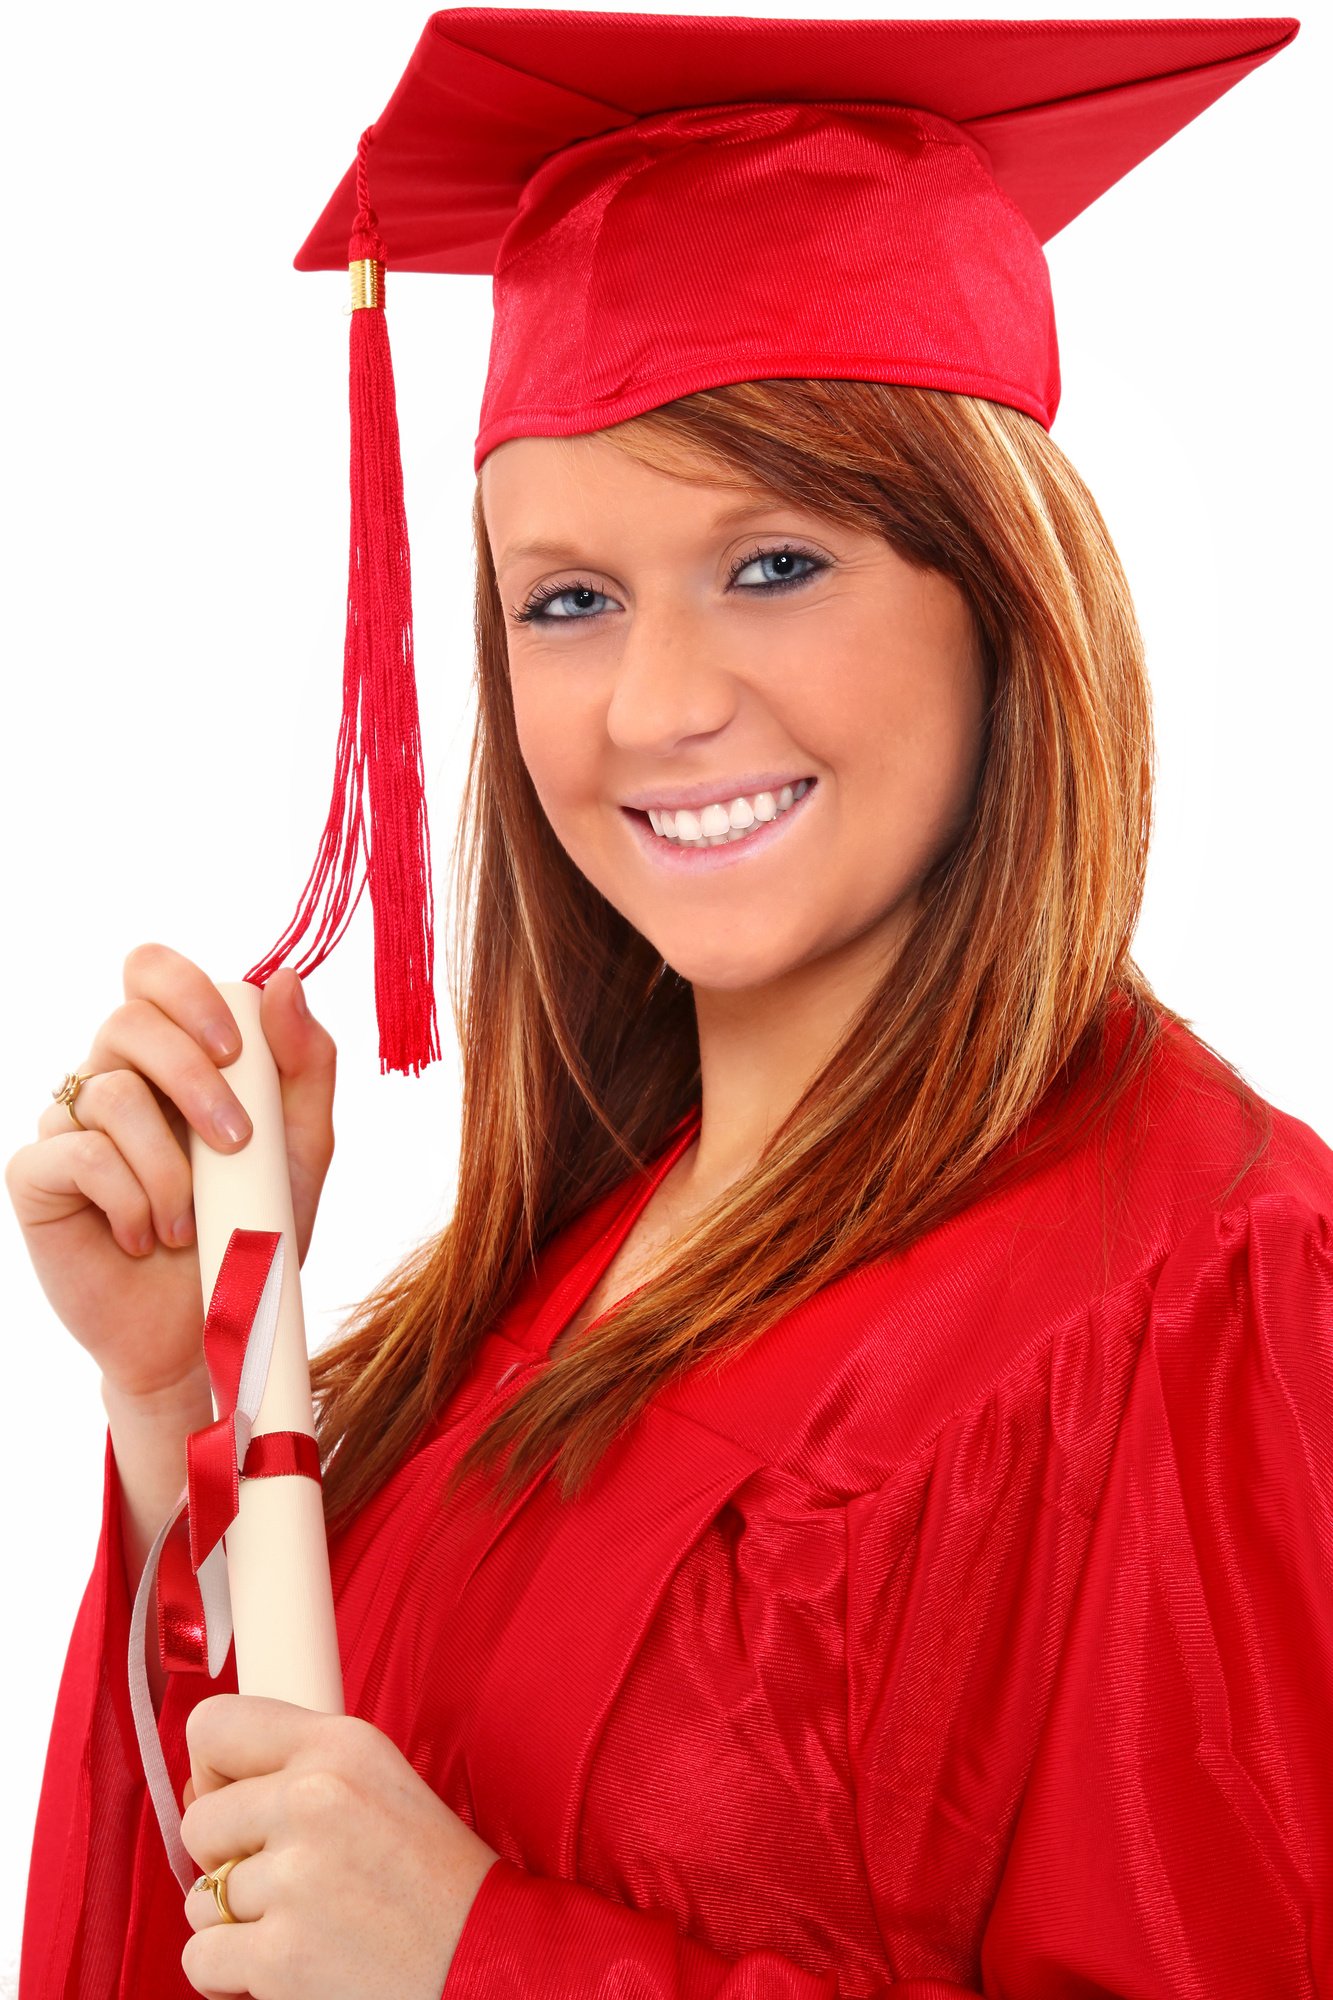 General Education Diploma: How Long Does It Take to Get a GED?